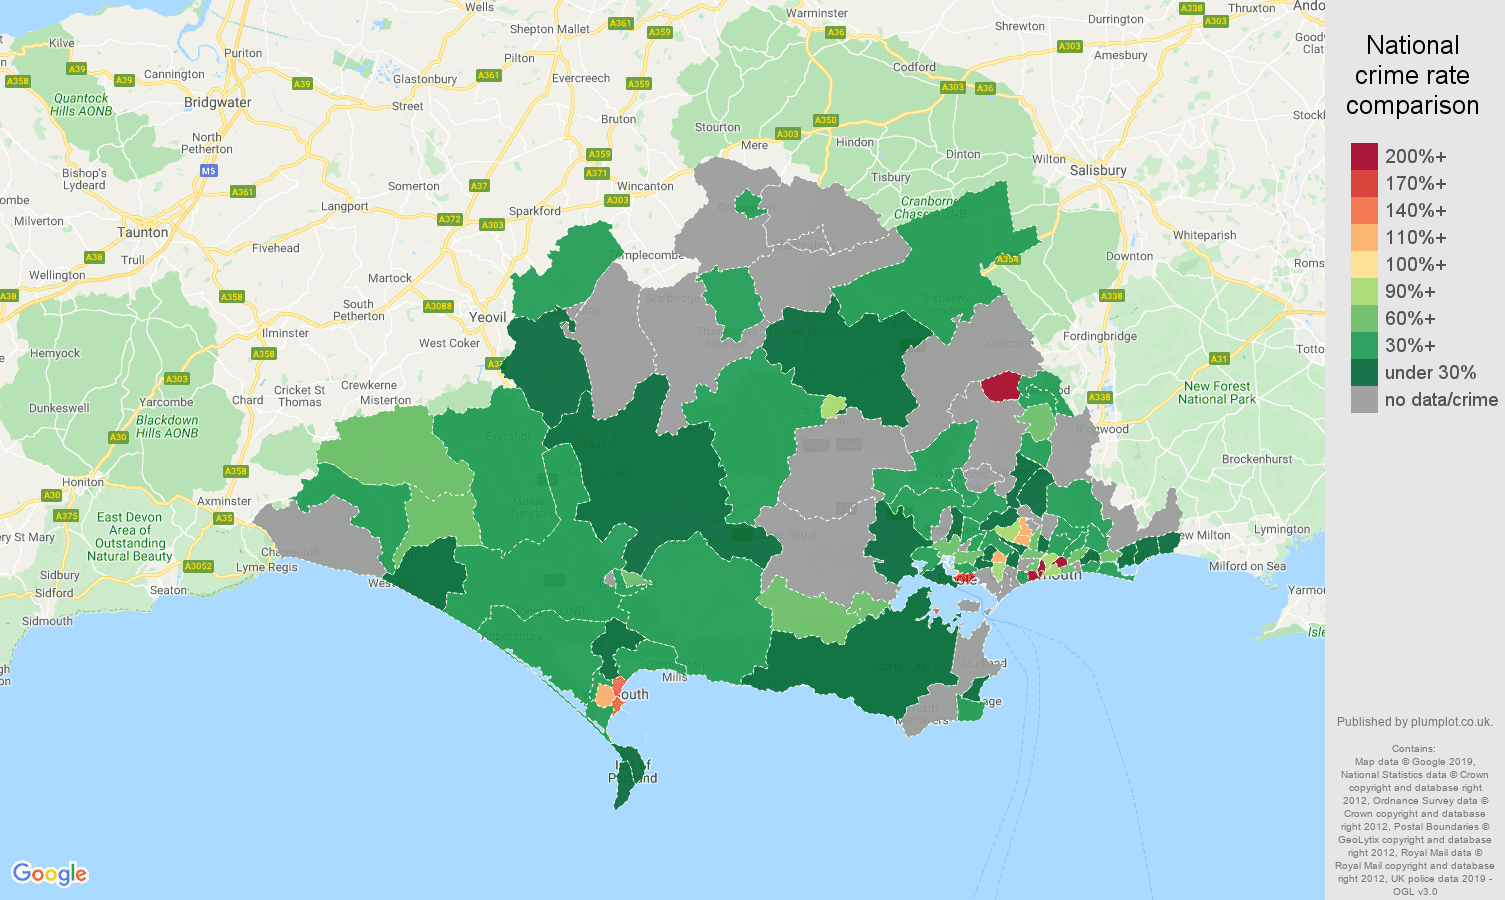 Dorset possession of weapons crime rate comparison map